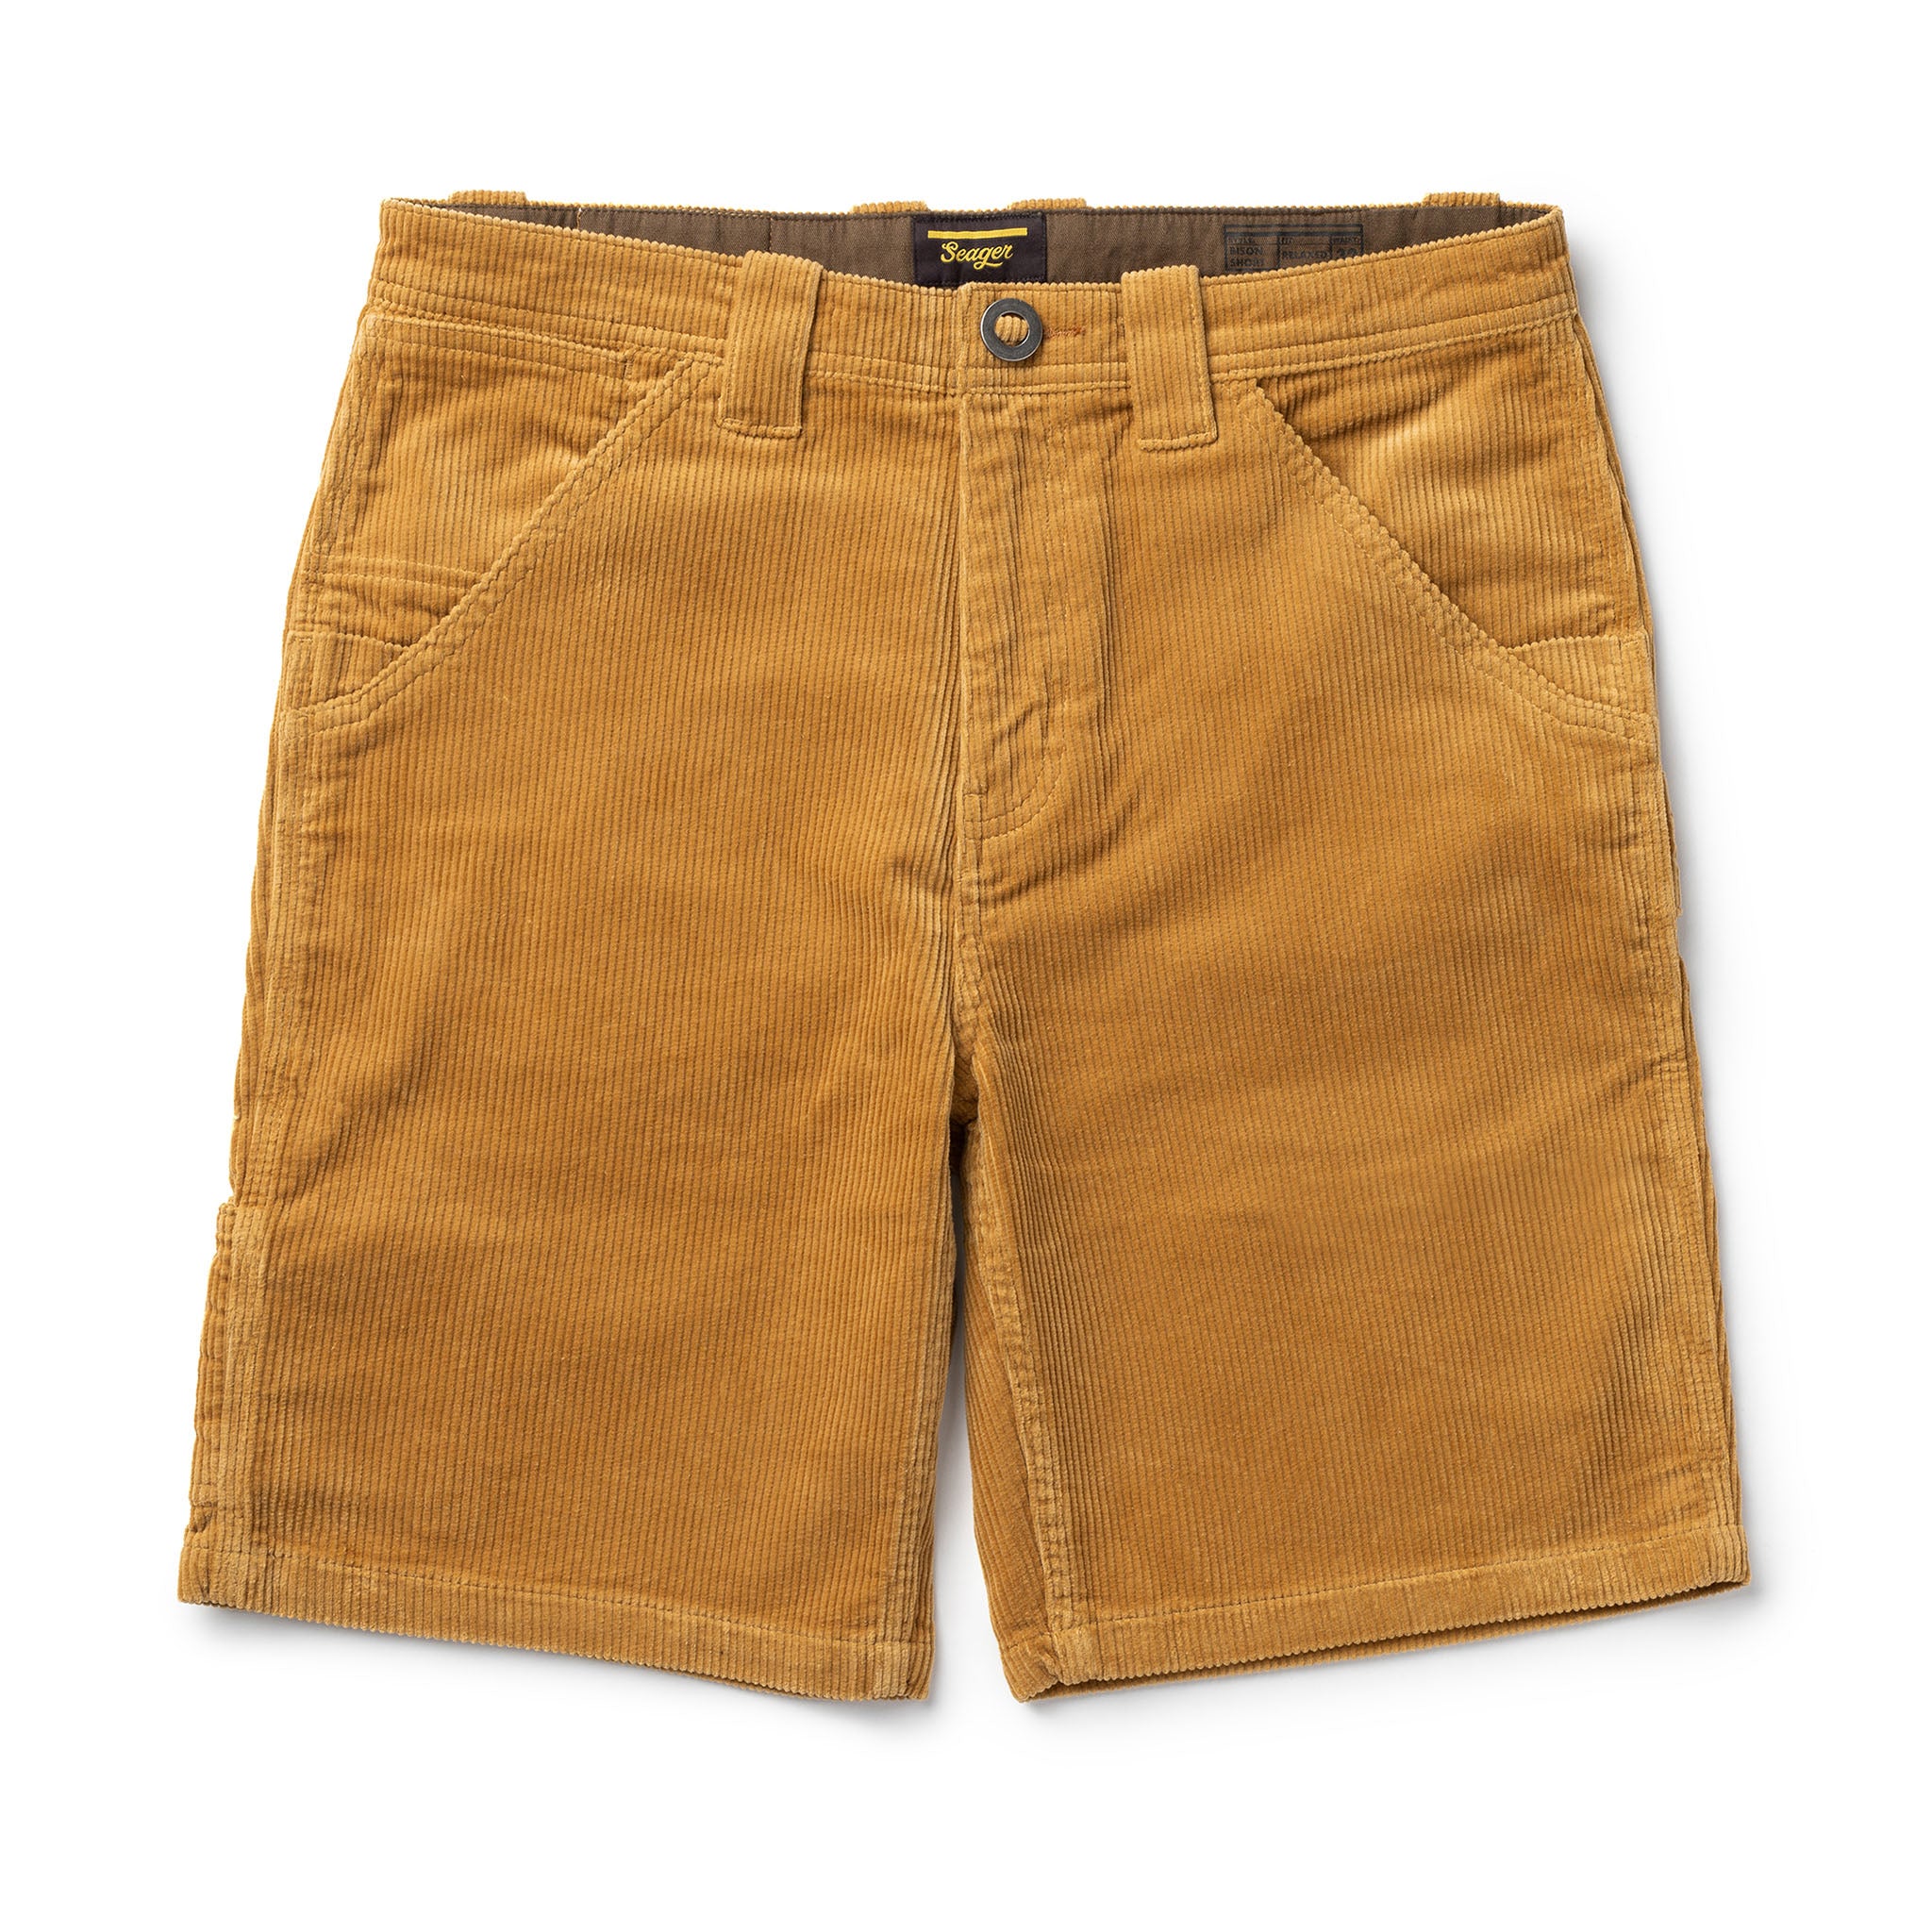 Bison Corduroy Short Coyote | Seager Co.